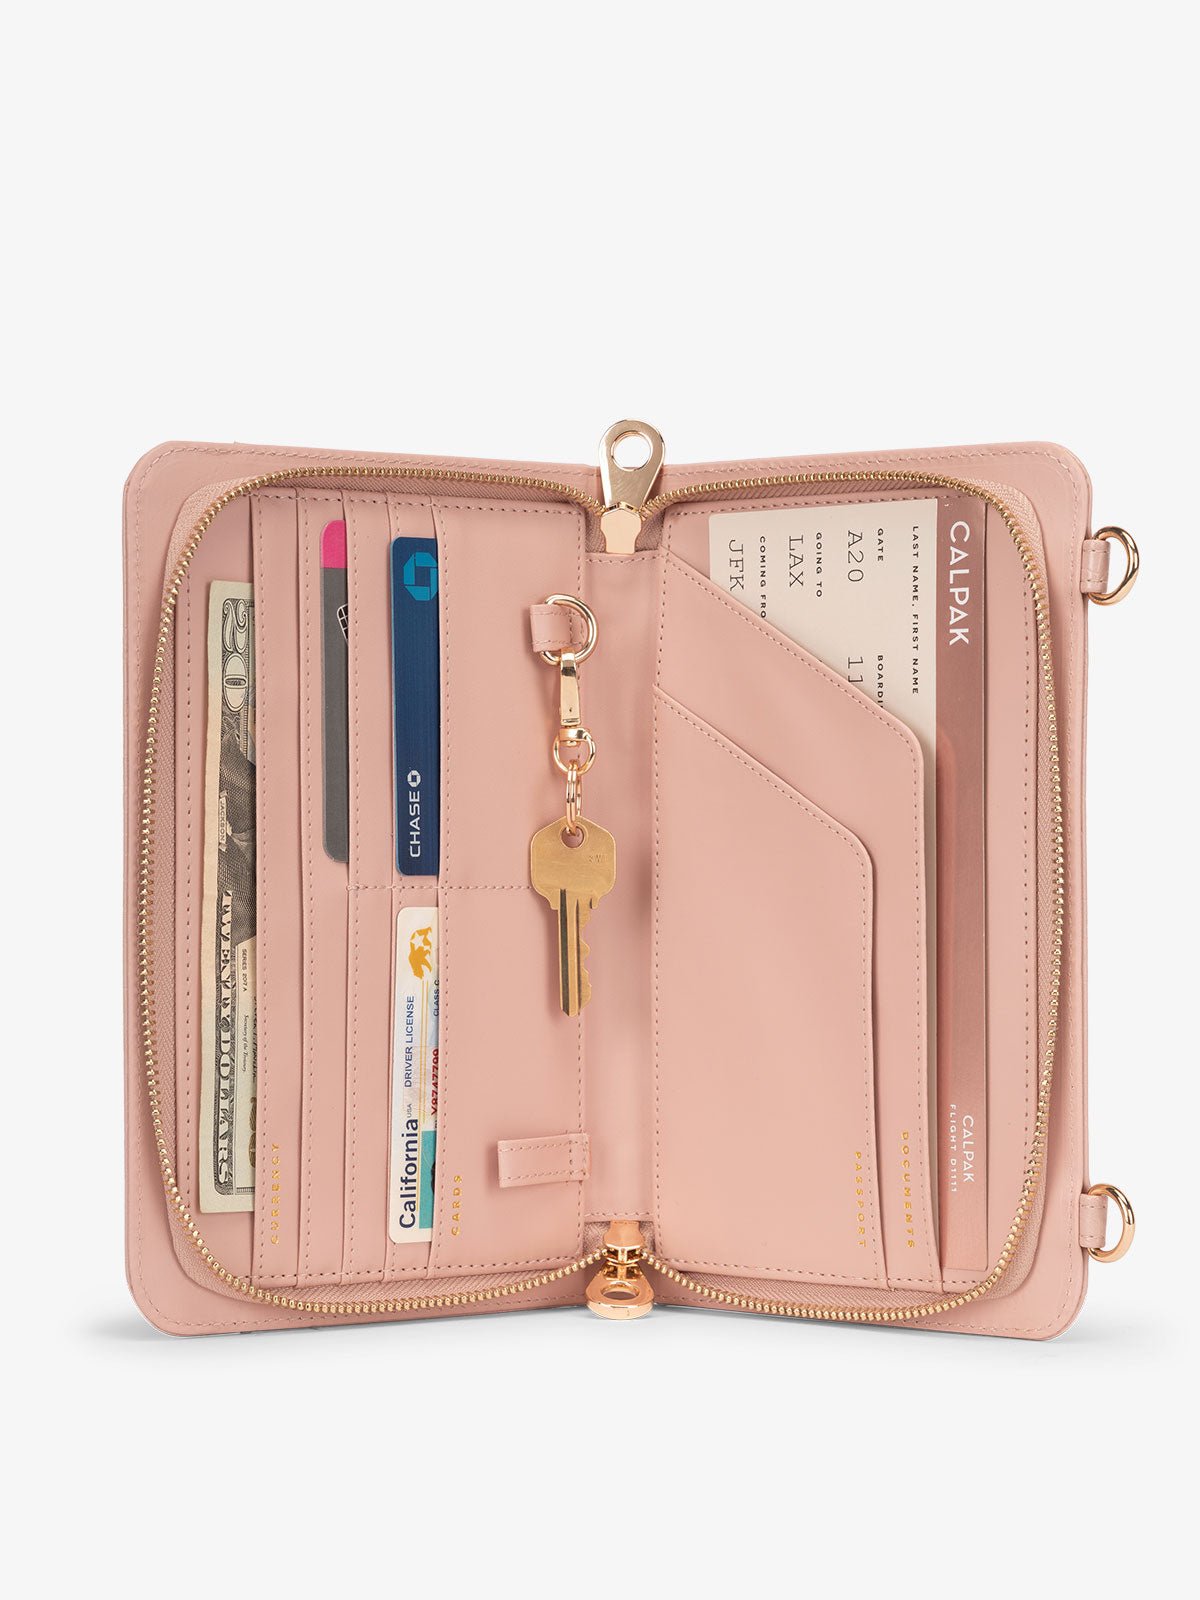 Interior of pink sand RFID lined CALPAK Croc Wallet featuring multiple pockets for cards and travel documents